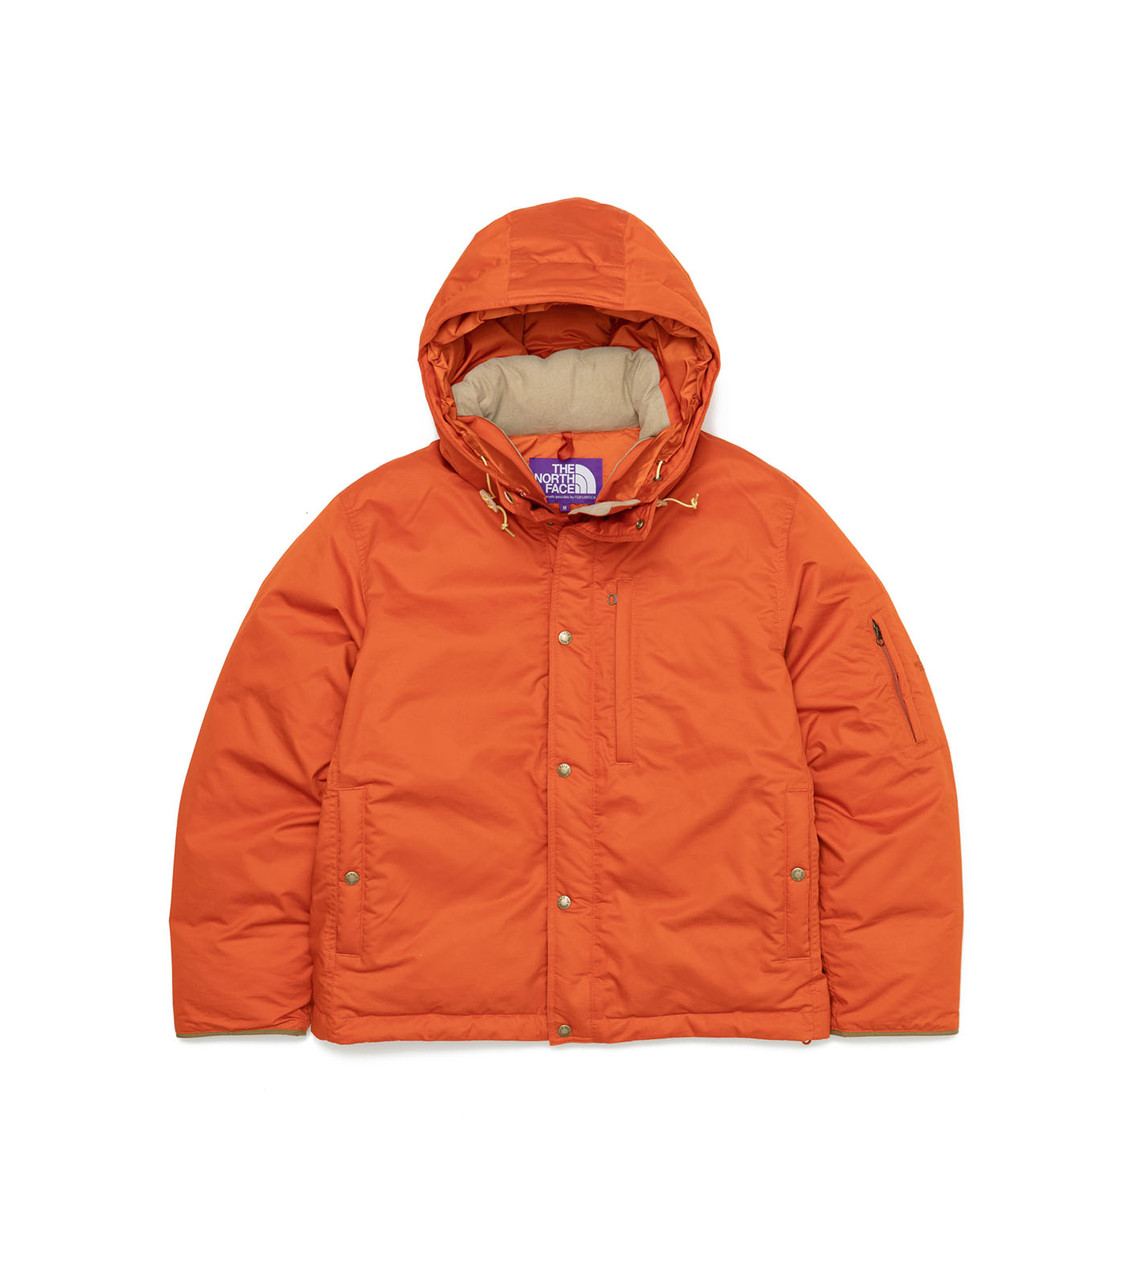 THE NORTH FACE PURPLE LABEL JACKET Lightweight Twill Mountain 